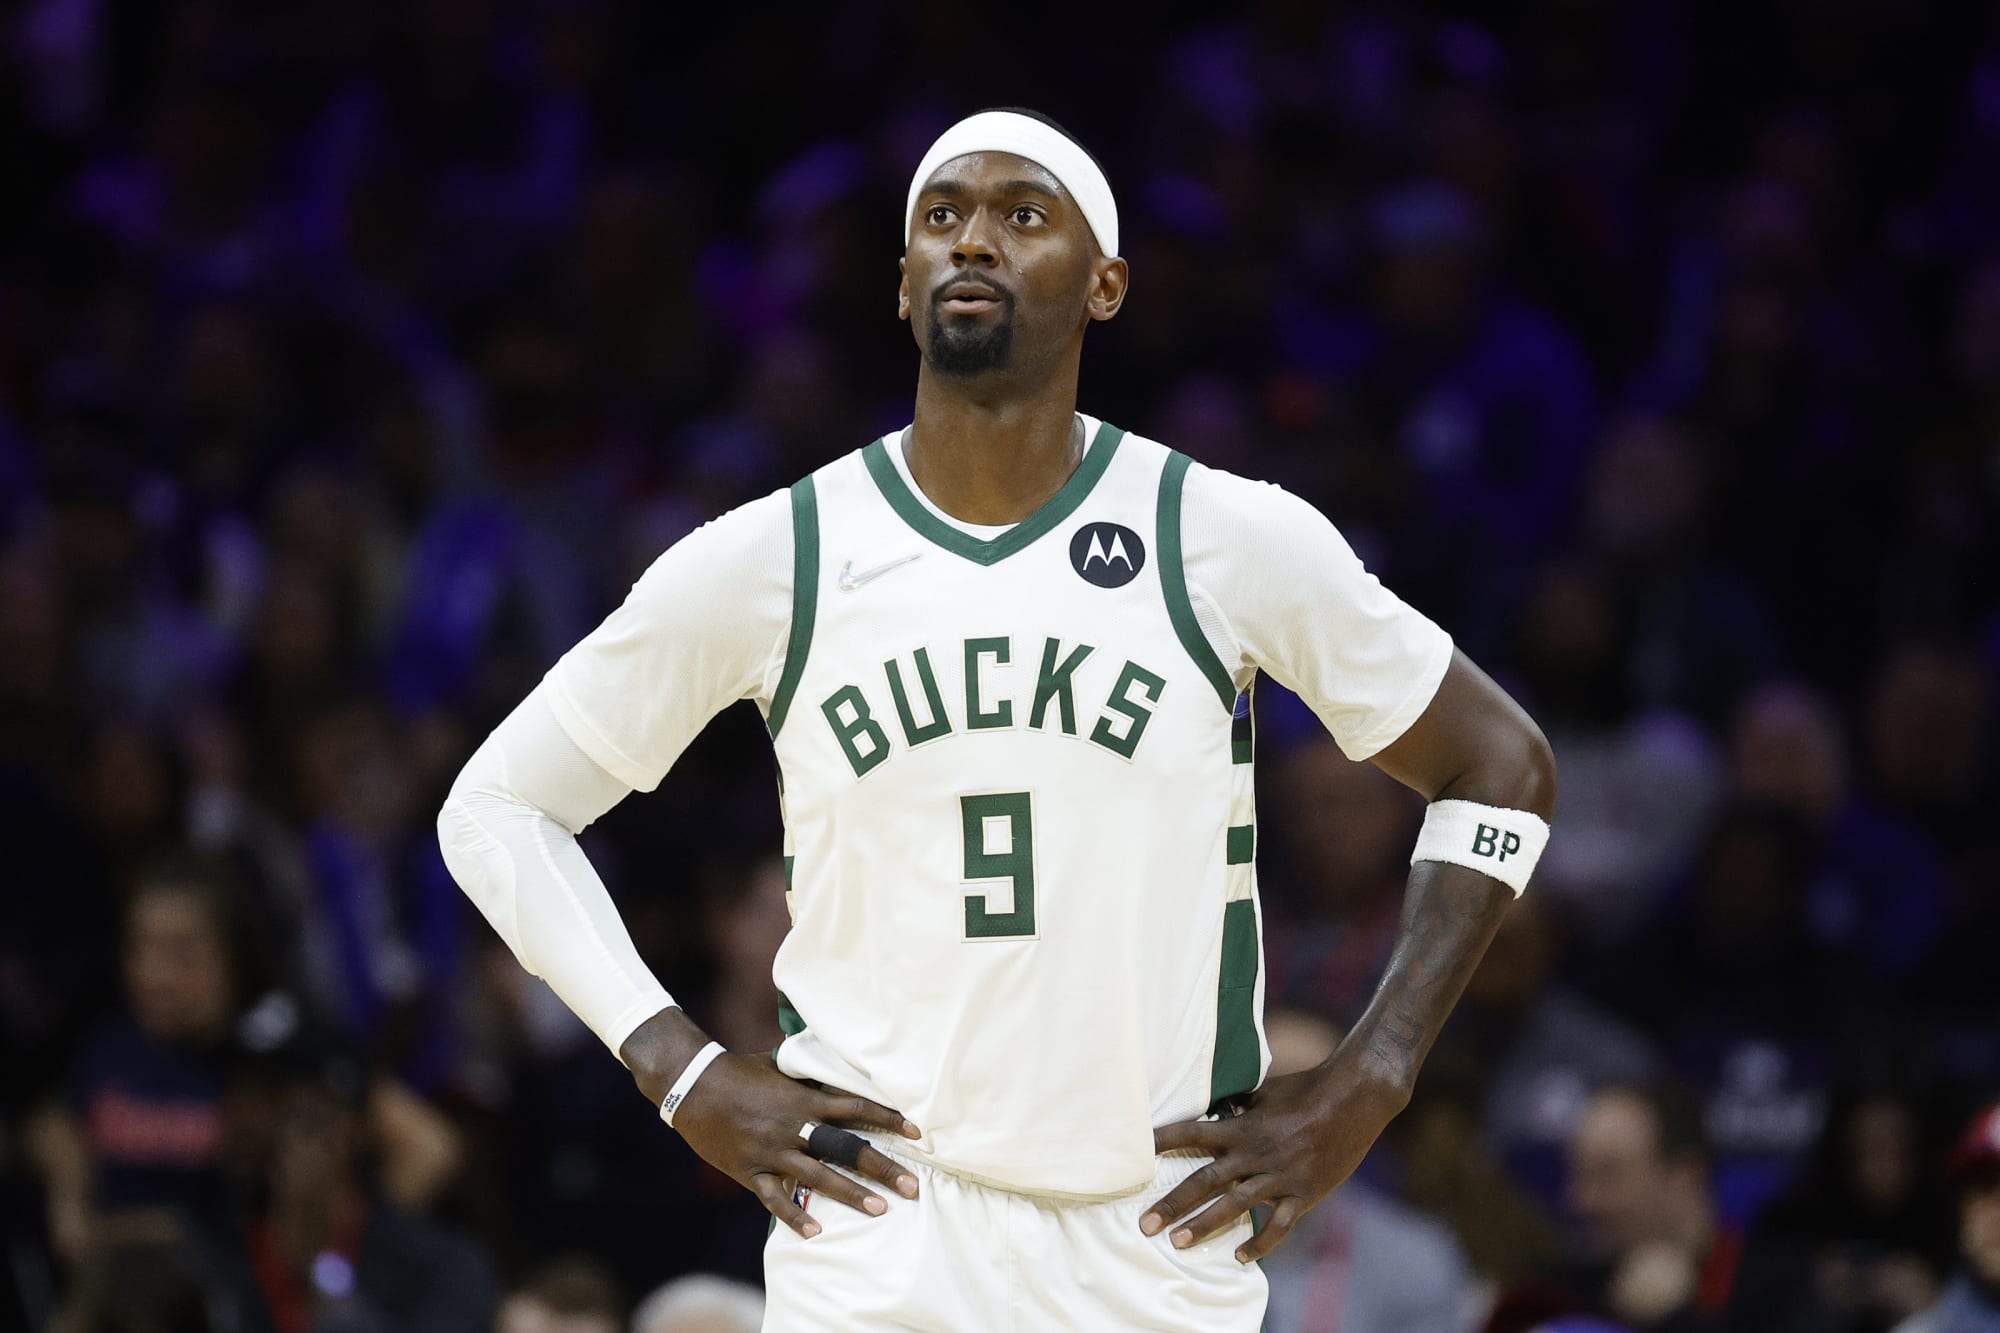 What to know about Bucks power forward Bobby Portis